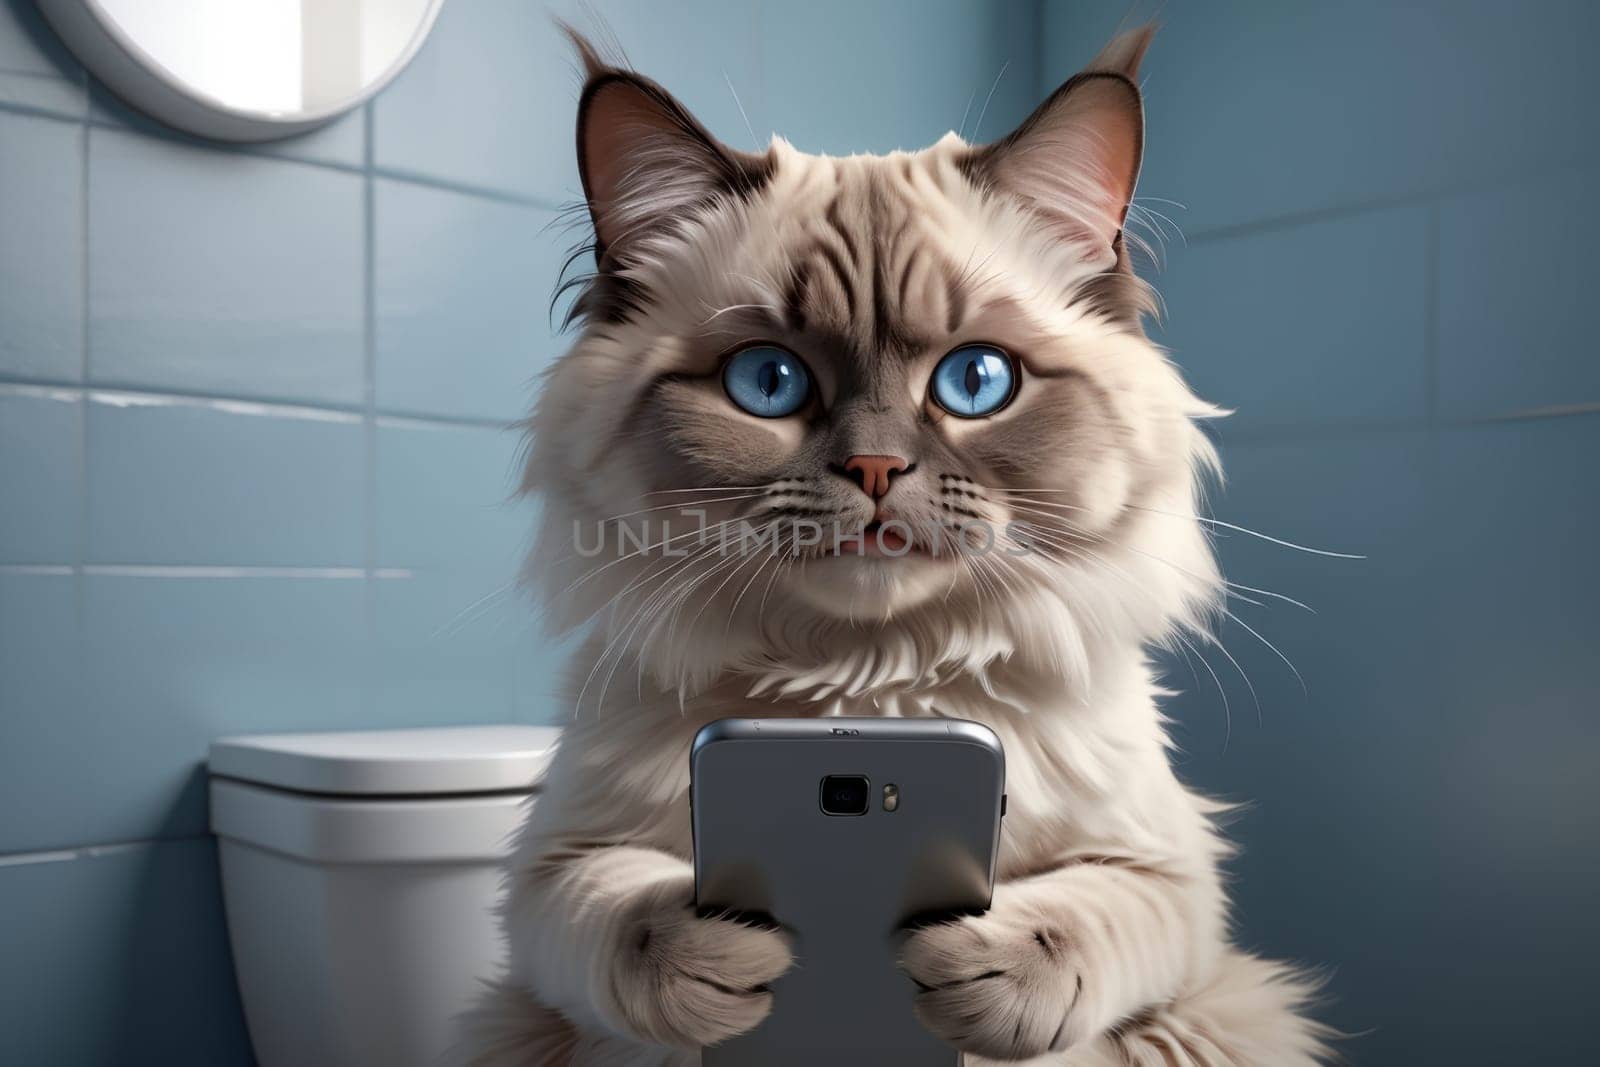 cute cat reading news on the phone while sitting in the toilet room .